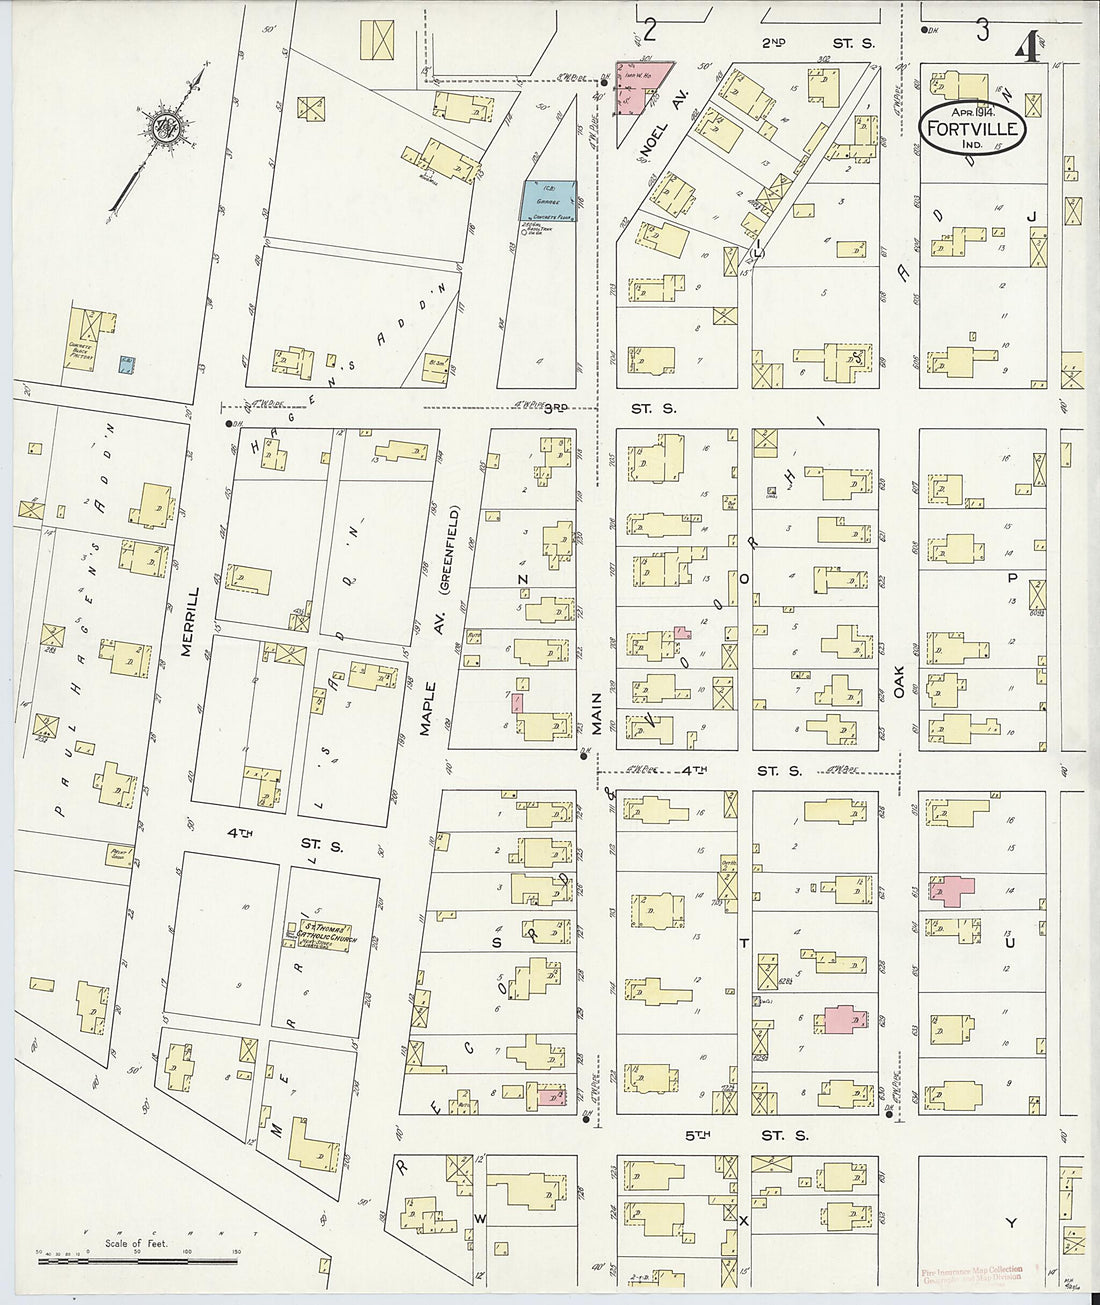 This old map of Fortville, Hancock County, Indiana was created by Sanborn Map Company in 1914